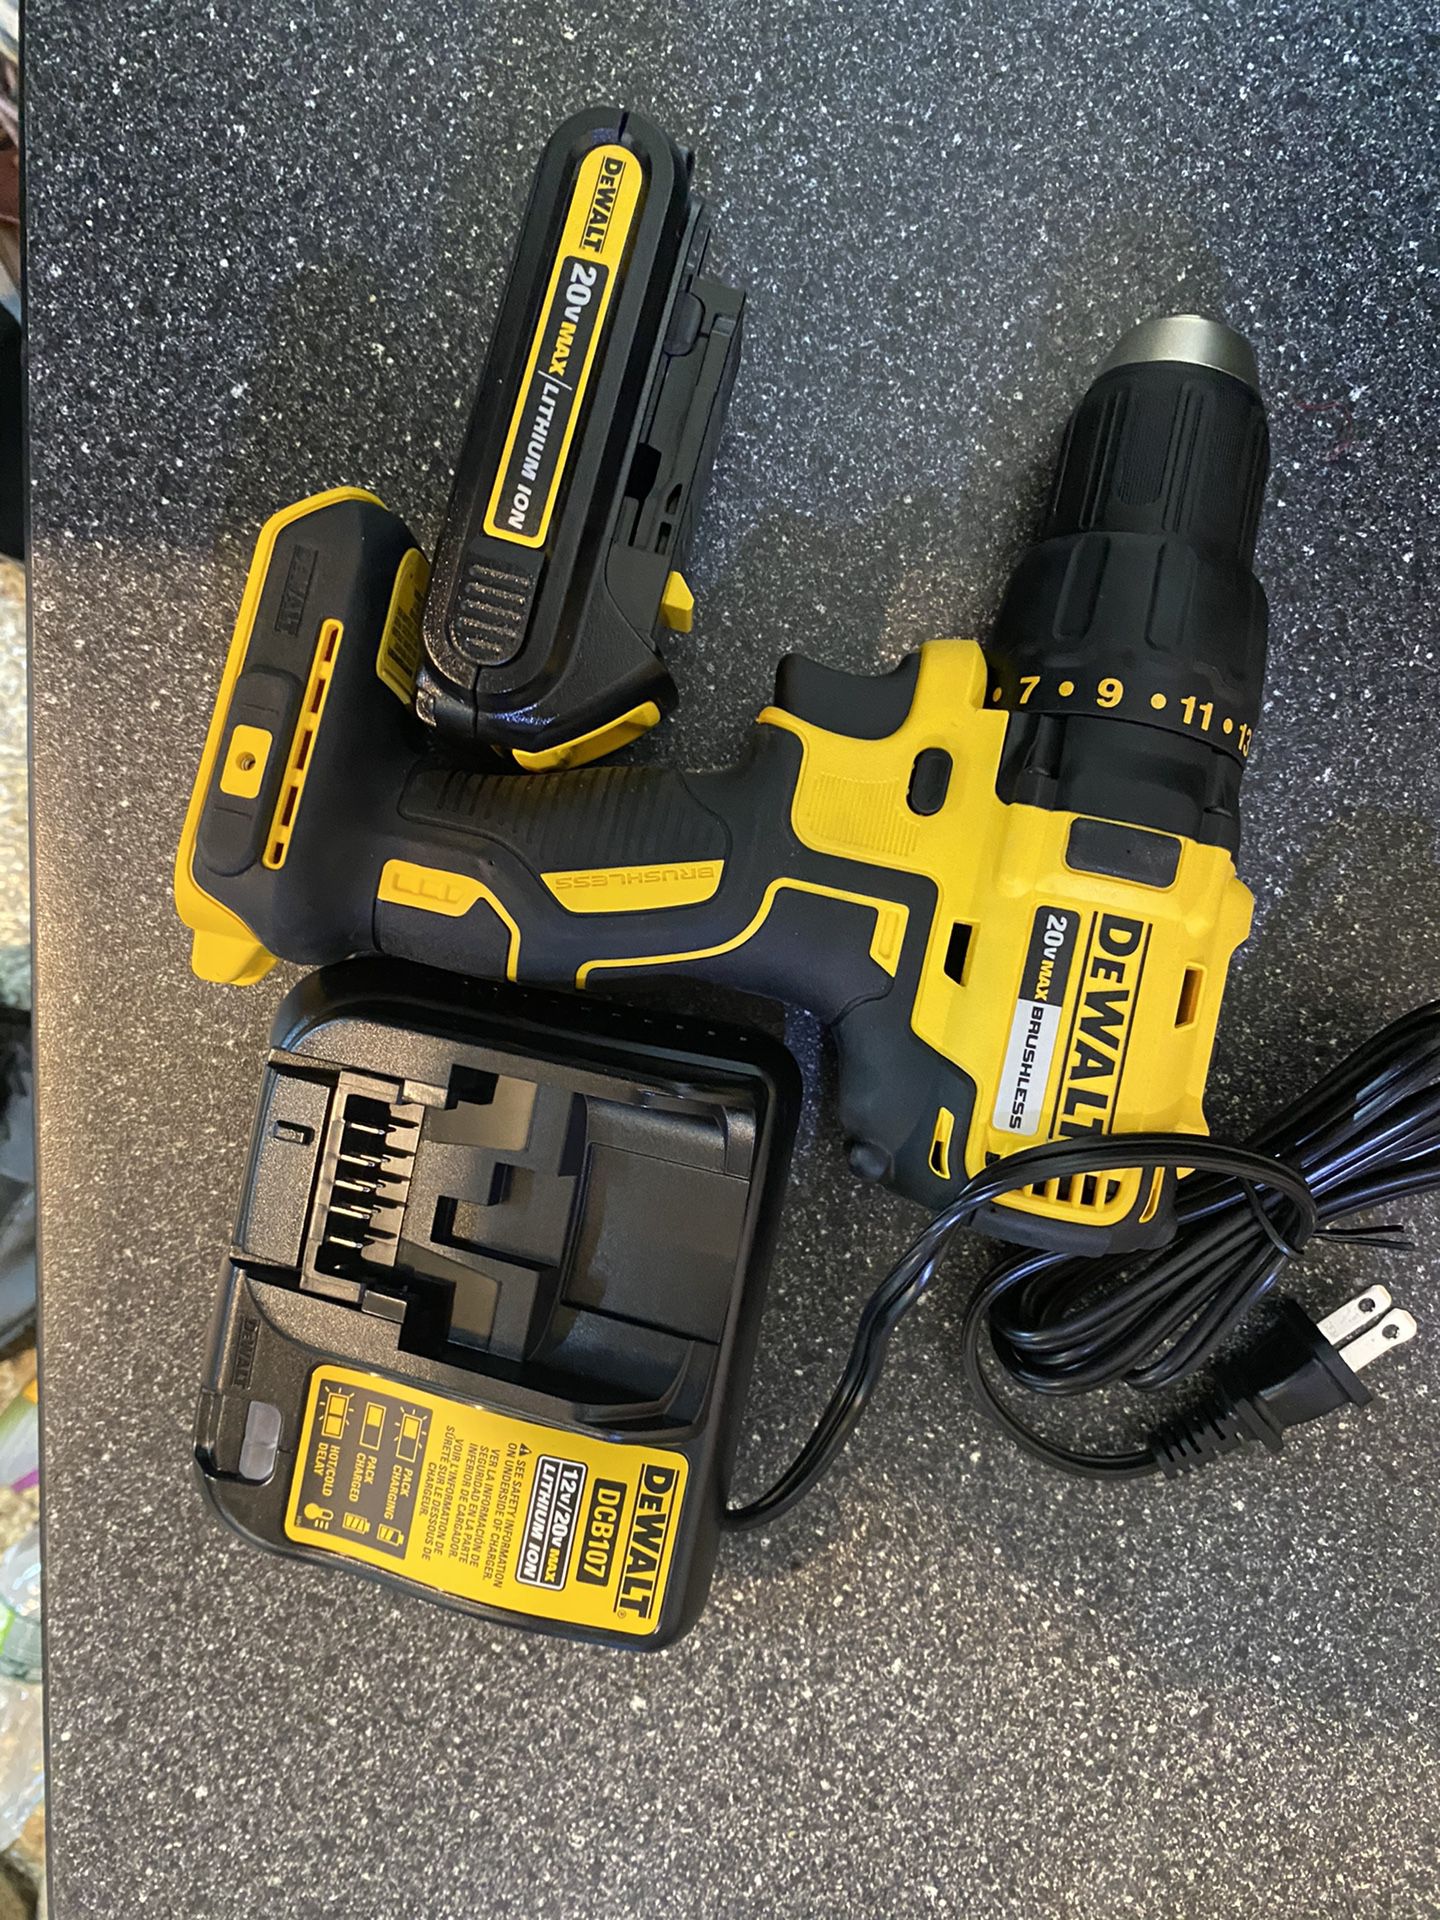 DCD777 20V MAX* COMPACT BRUSHLESS DRILL/DRIVERf